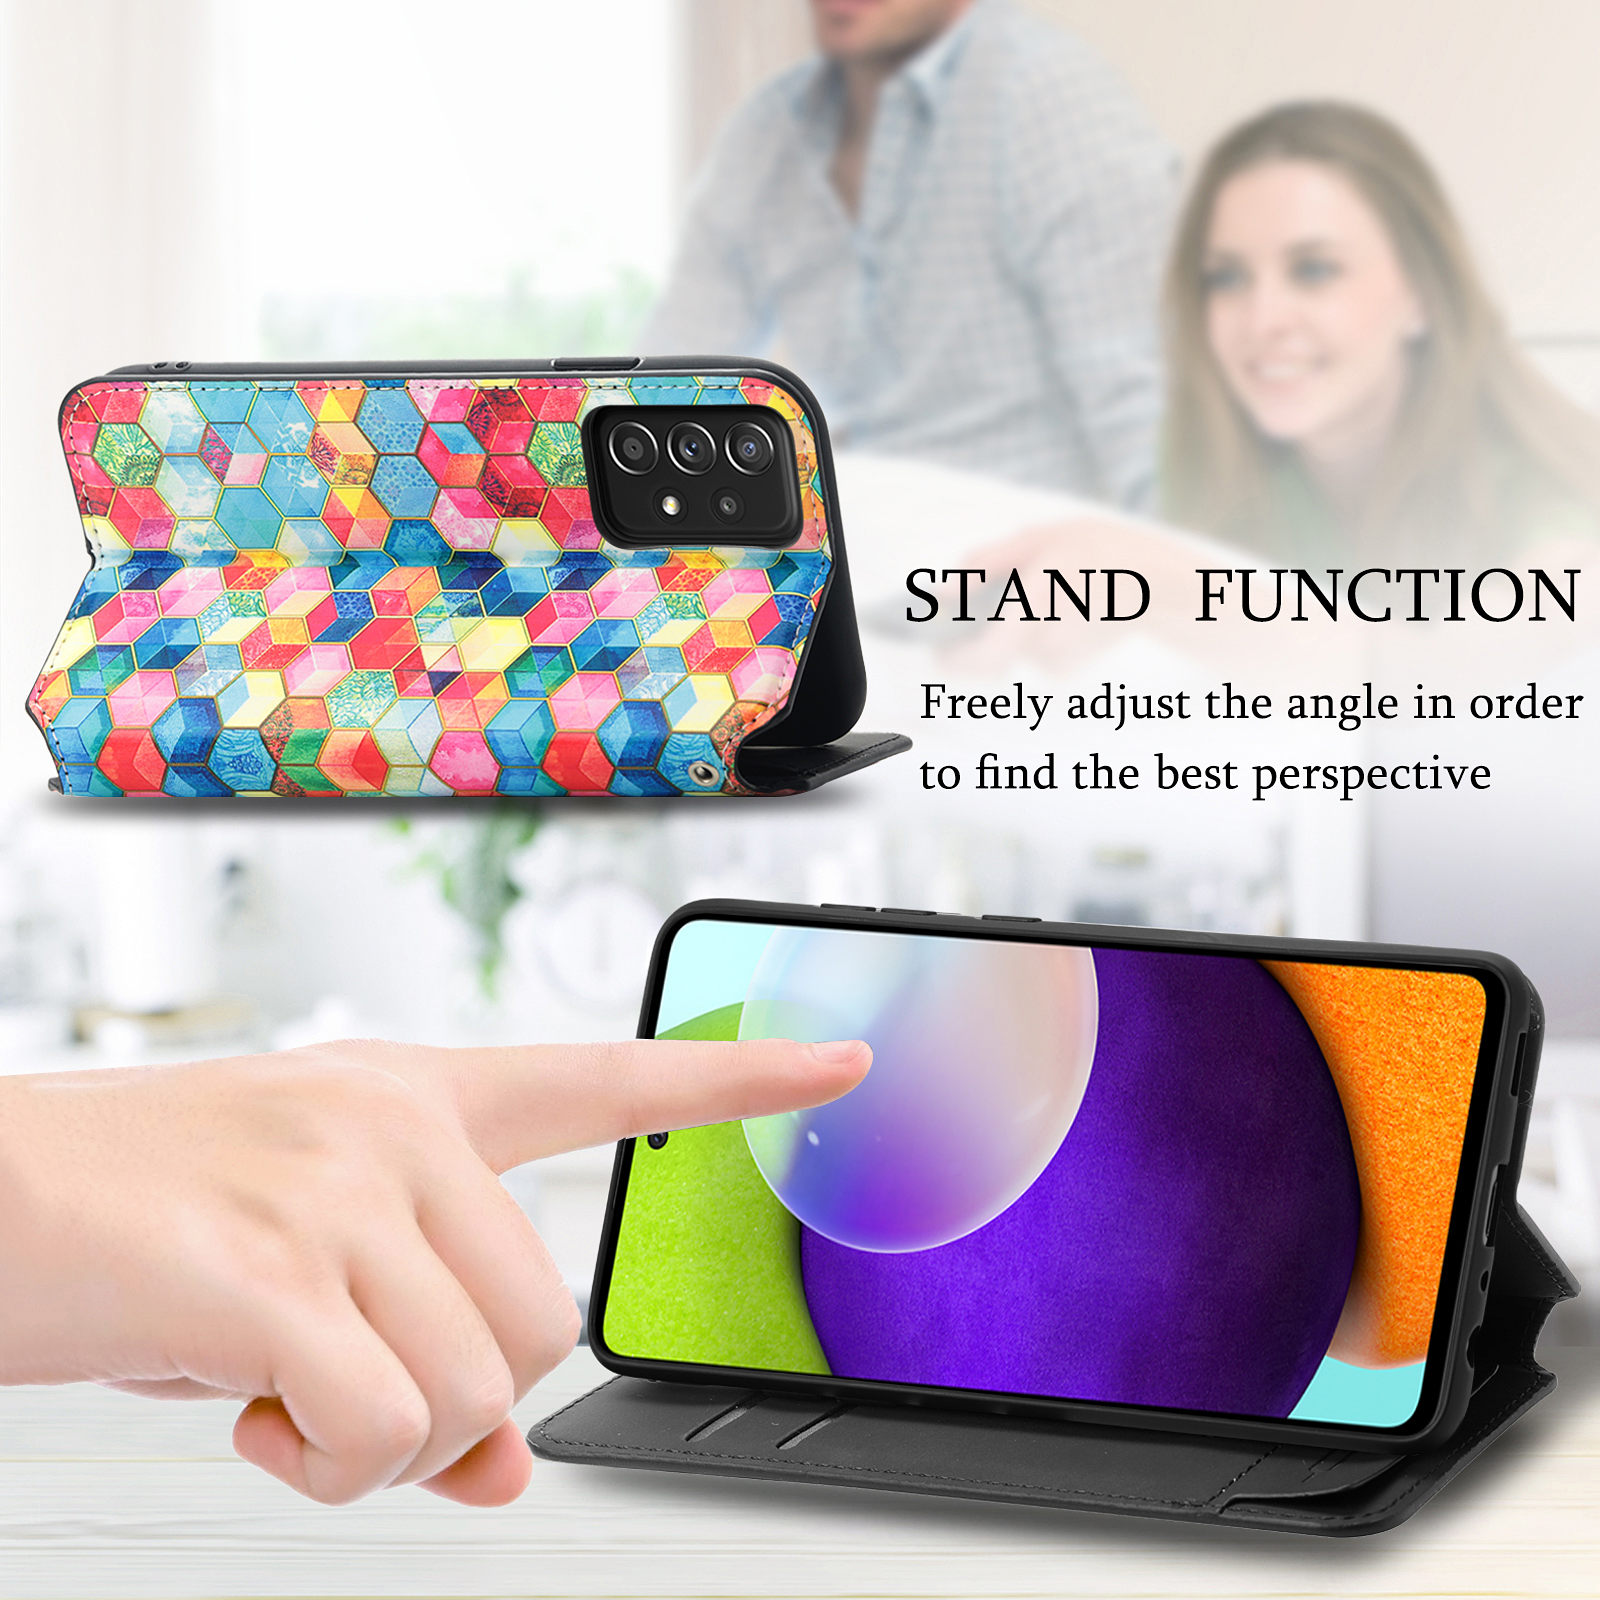 Case for Samsung Galaxy S21 FE Case, Galaxy S21 FE Case Wallet Case PU Leather and Hard PC RFID Blocking Slim Durable Protective Phone Case Cover For Samsung Galaxy S21 FE,Cube - image 5 of 9